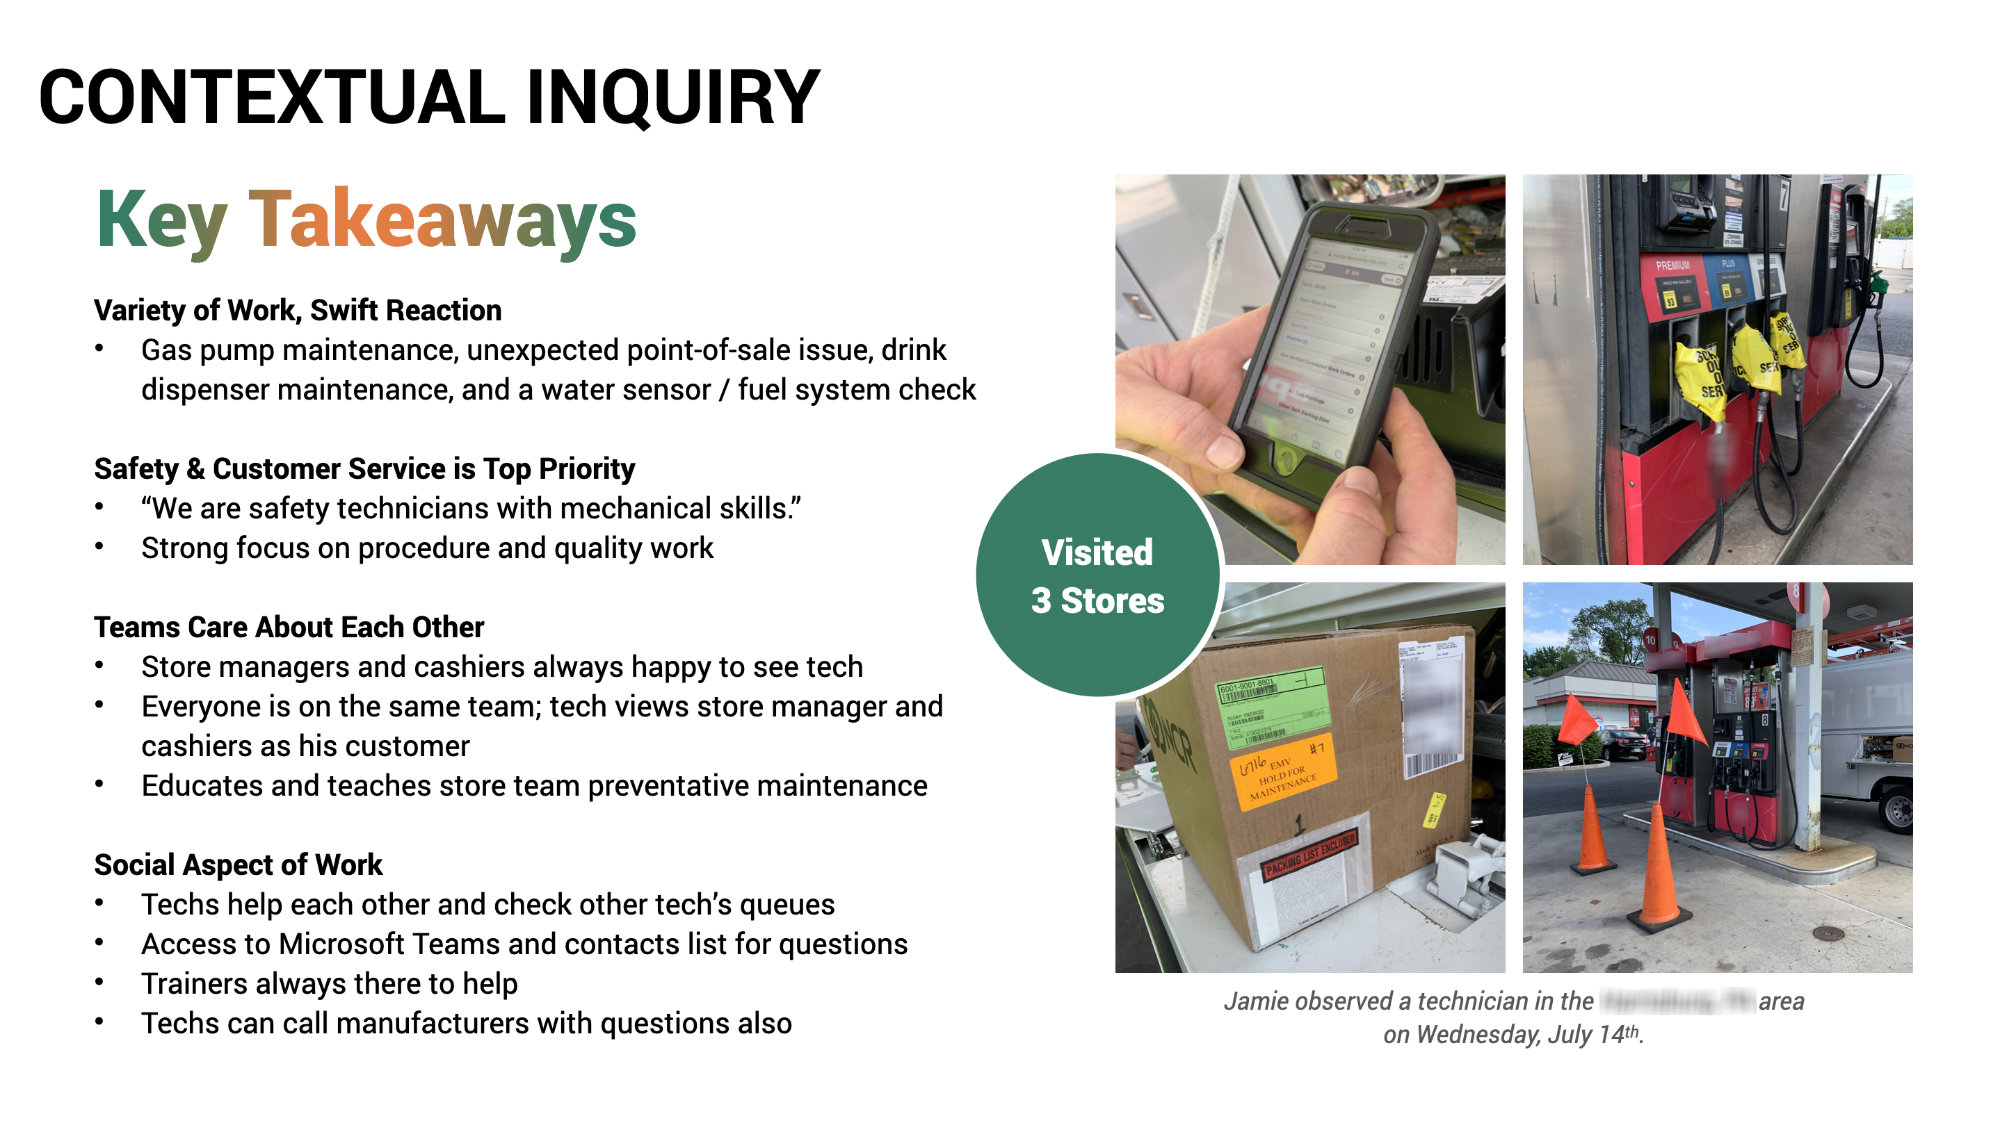 Summary slide that I presented to executive stakeholders detailing my contextual inquiry technician observation.